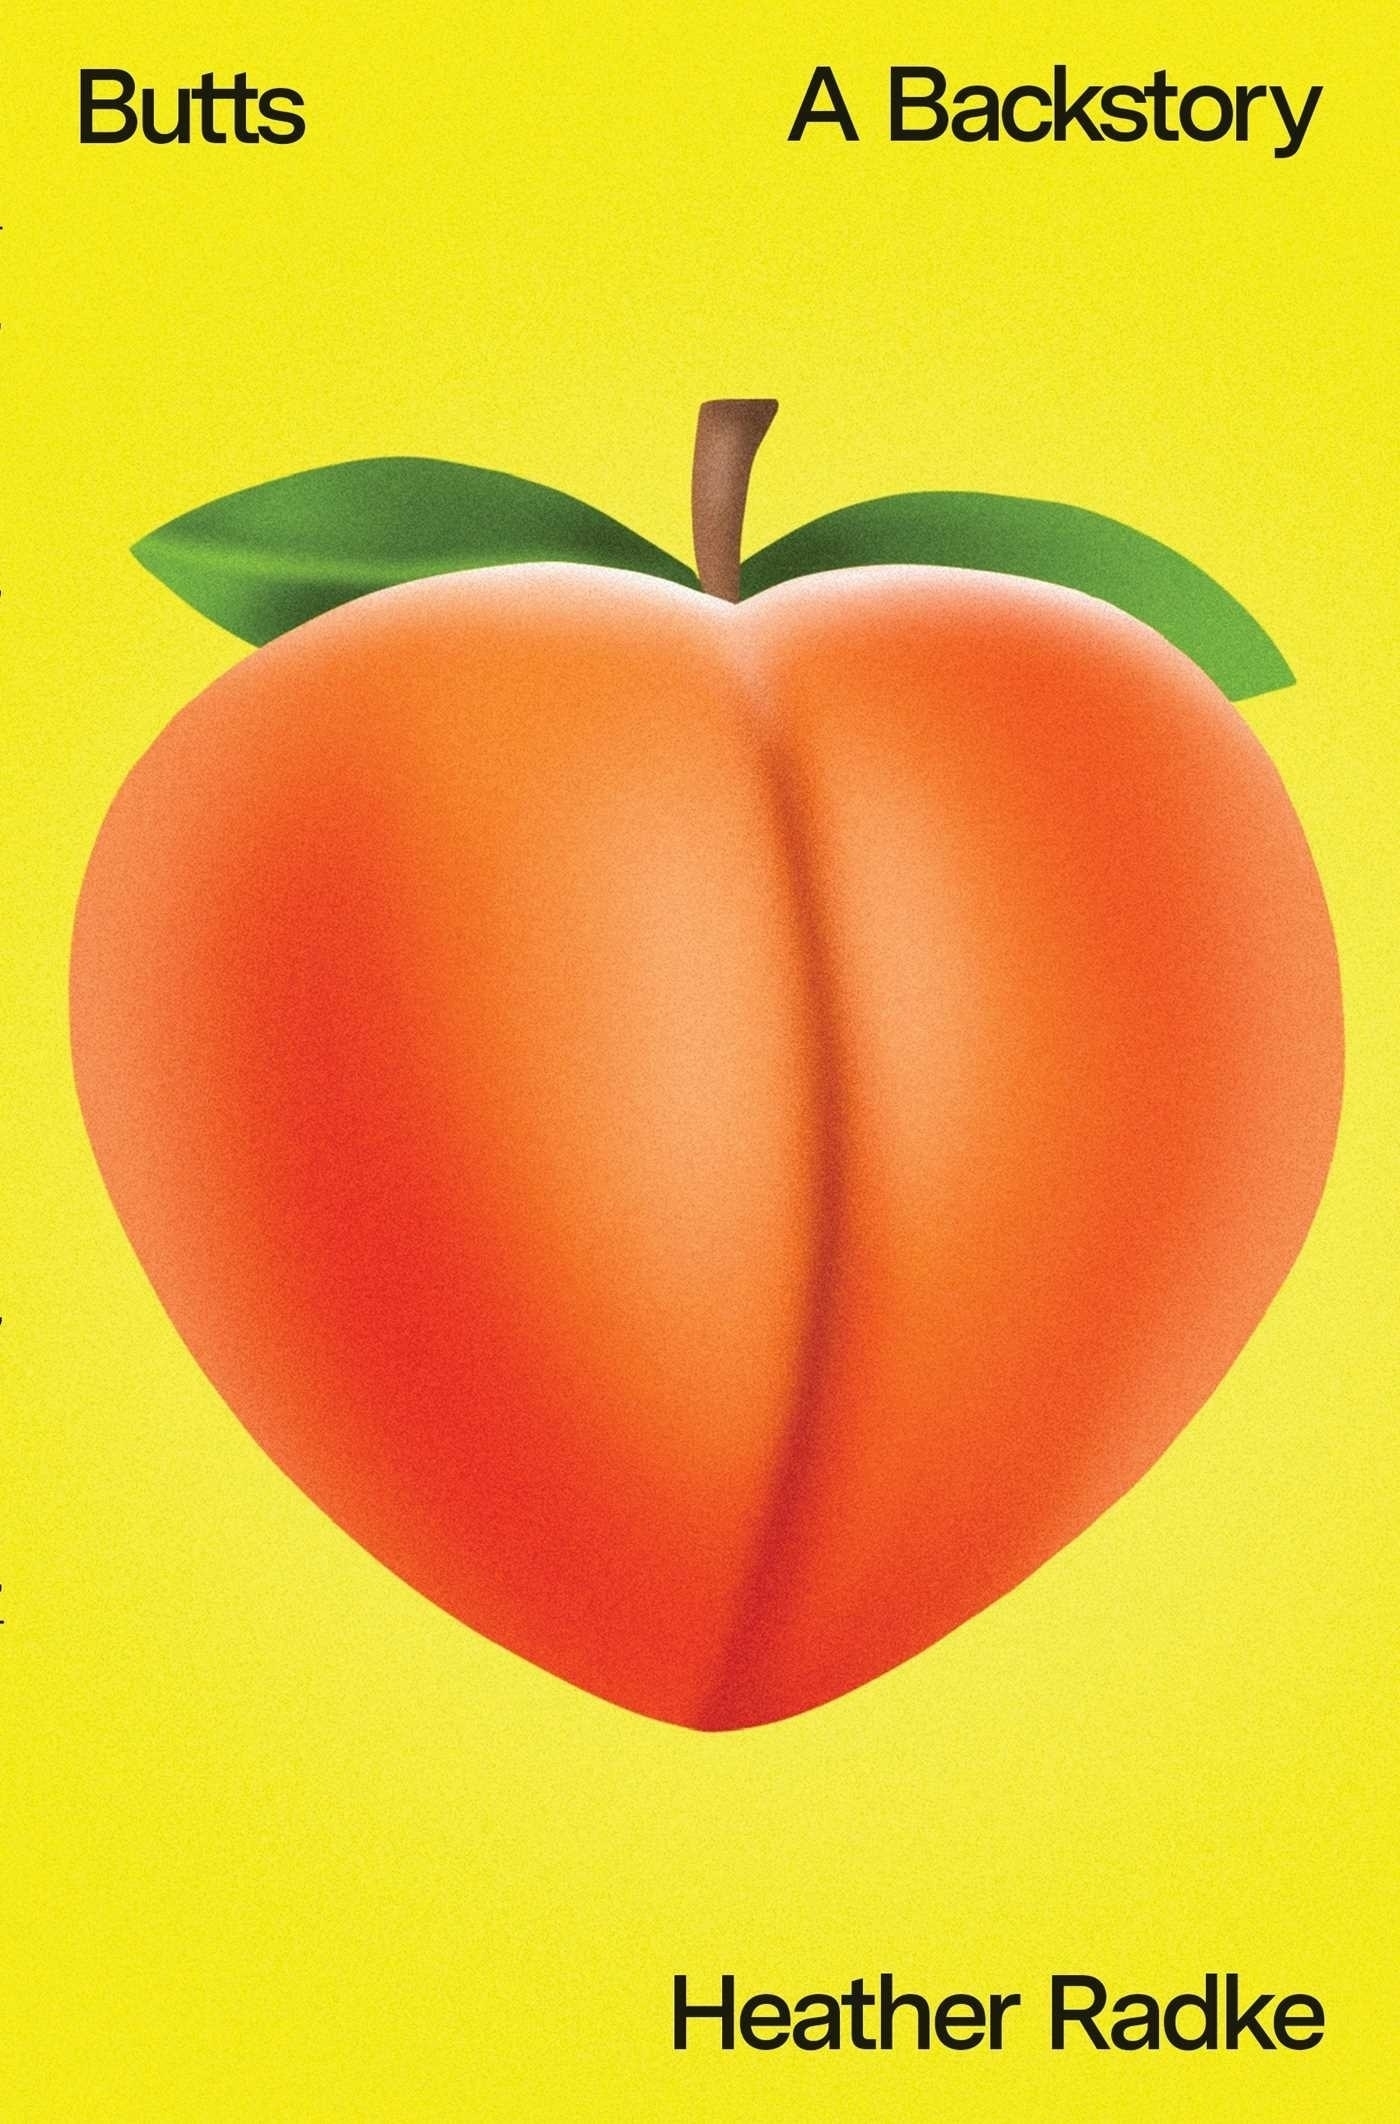 cover of 'Butts' book: a large peach emoji on a bright yellow background